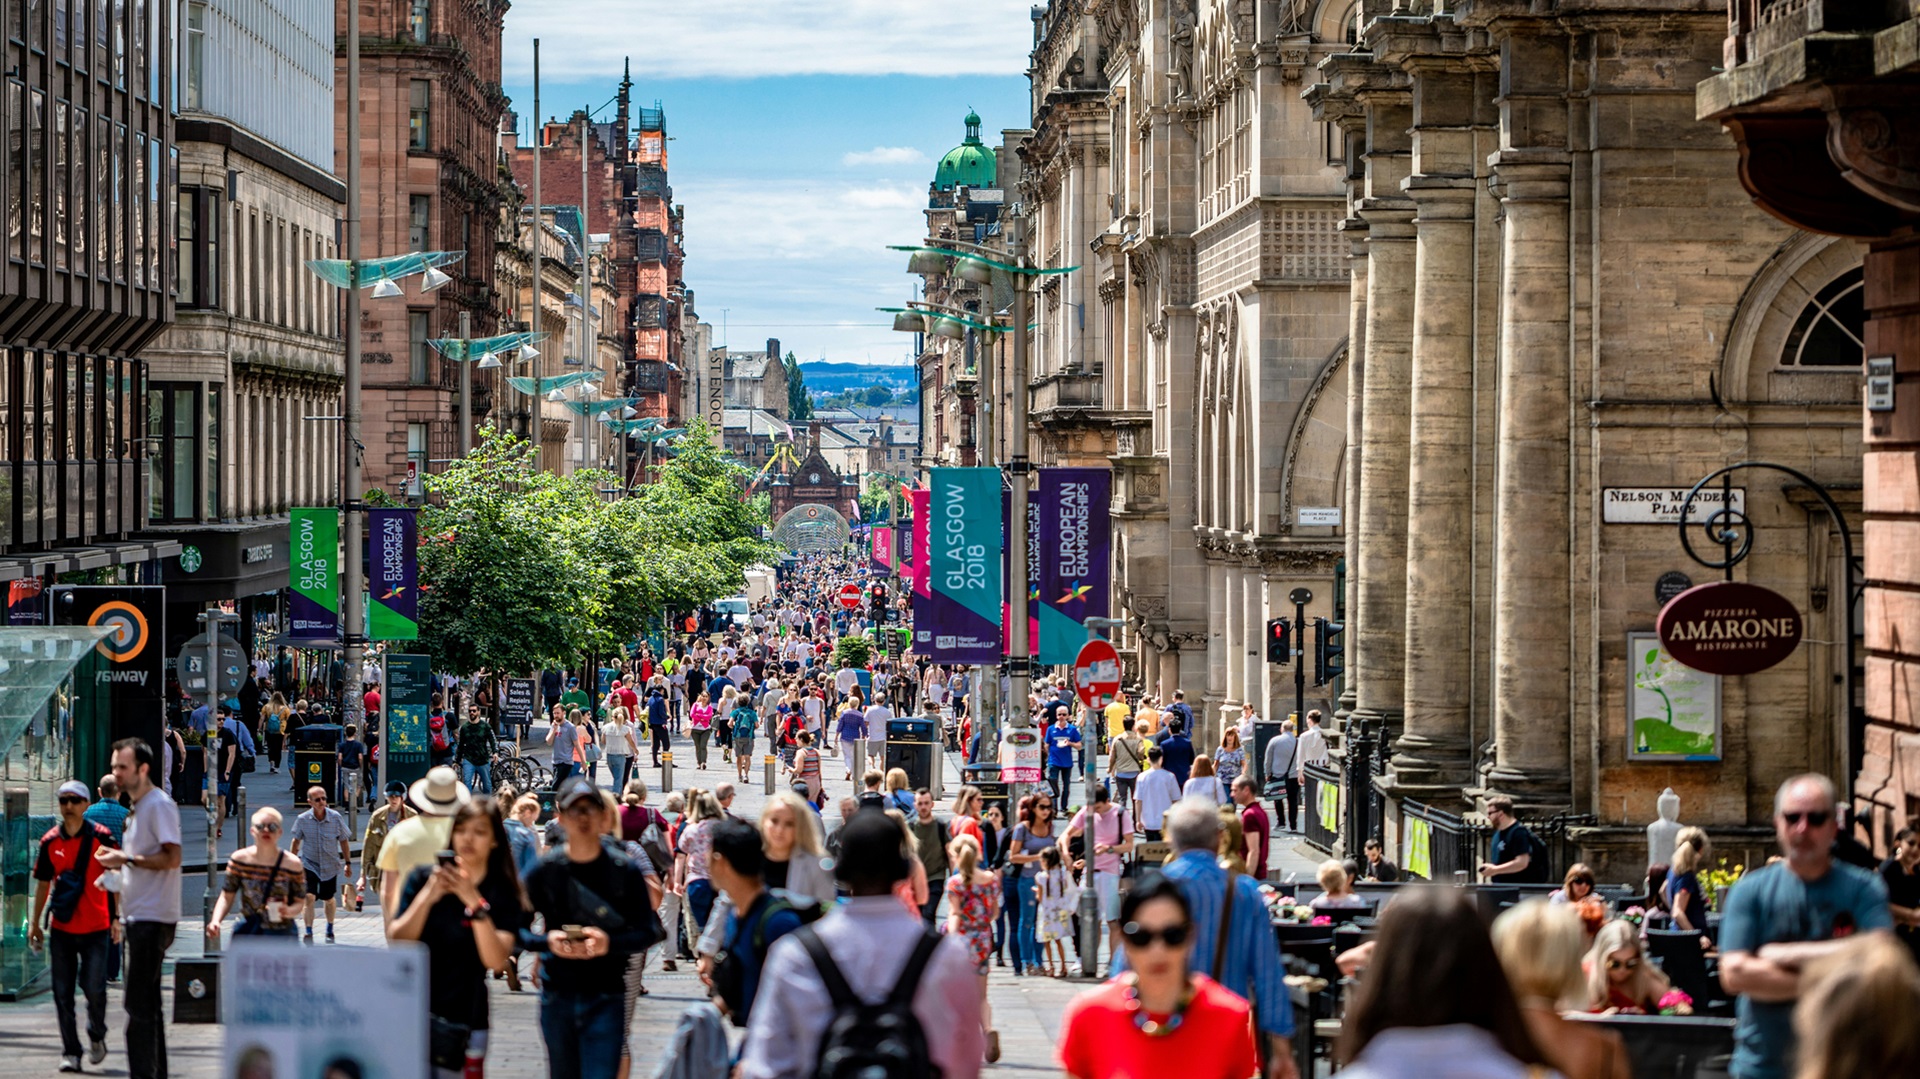 rough sleeping and temporary accommodation in Scotland is under the spotlight on Buchanan Street in Glasgow